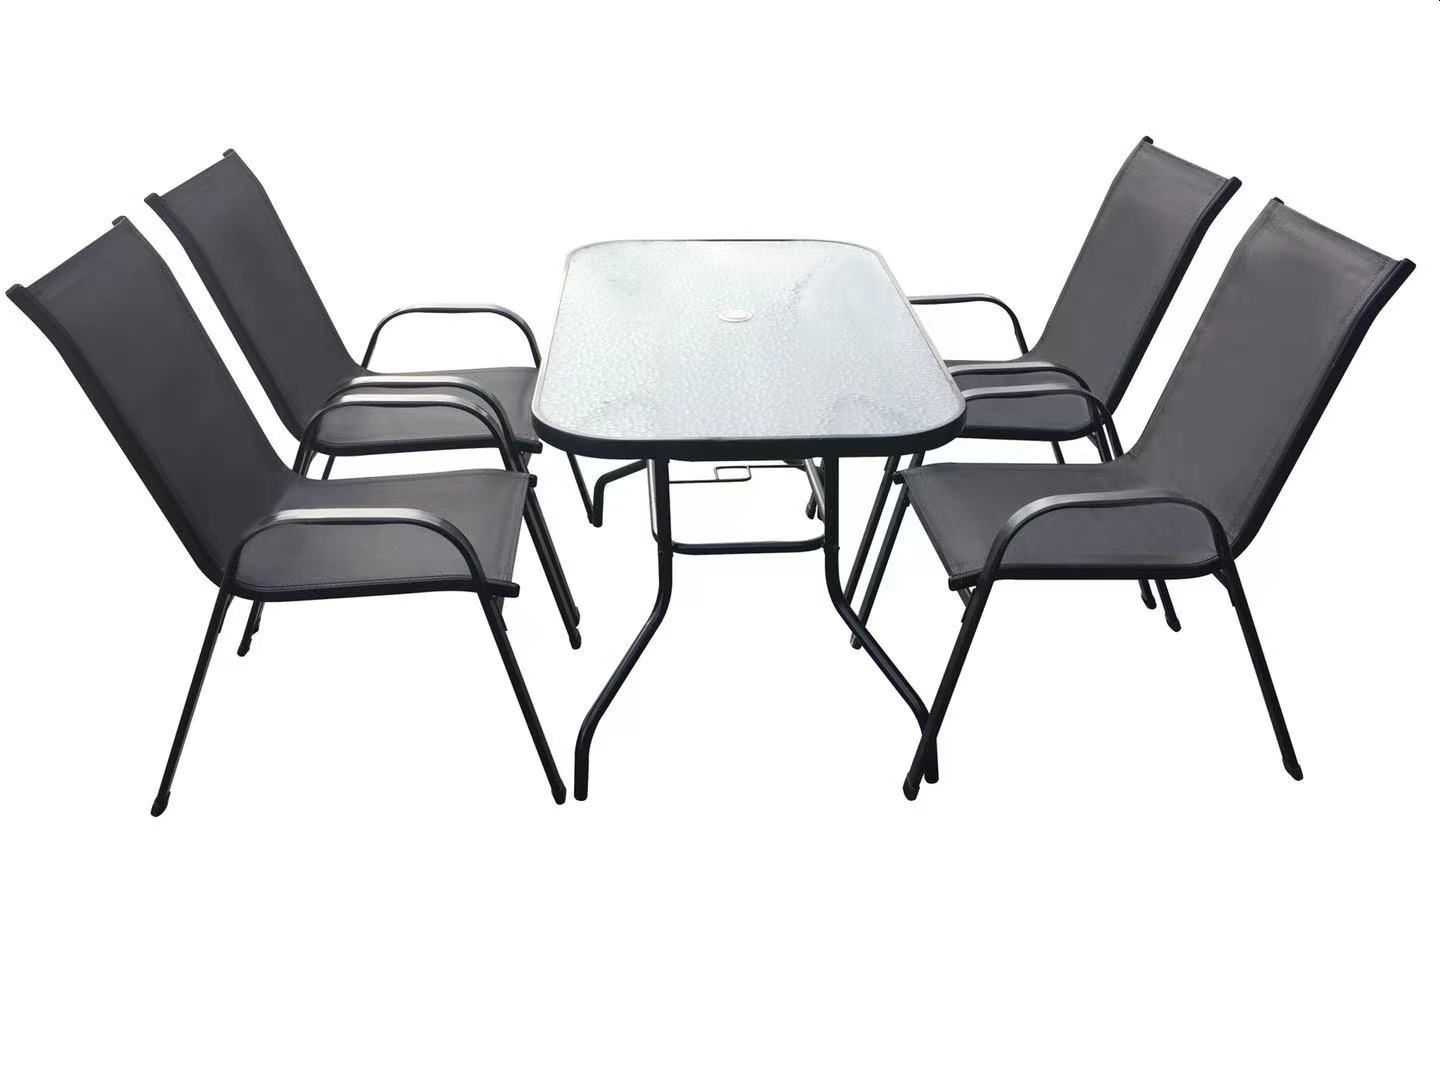 Seagull 5 Piece 120cm Glass Table and KD Chair Patio Set